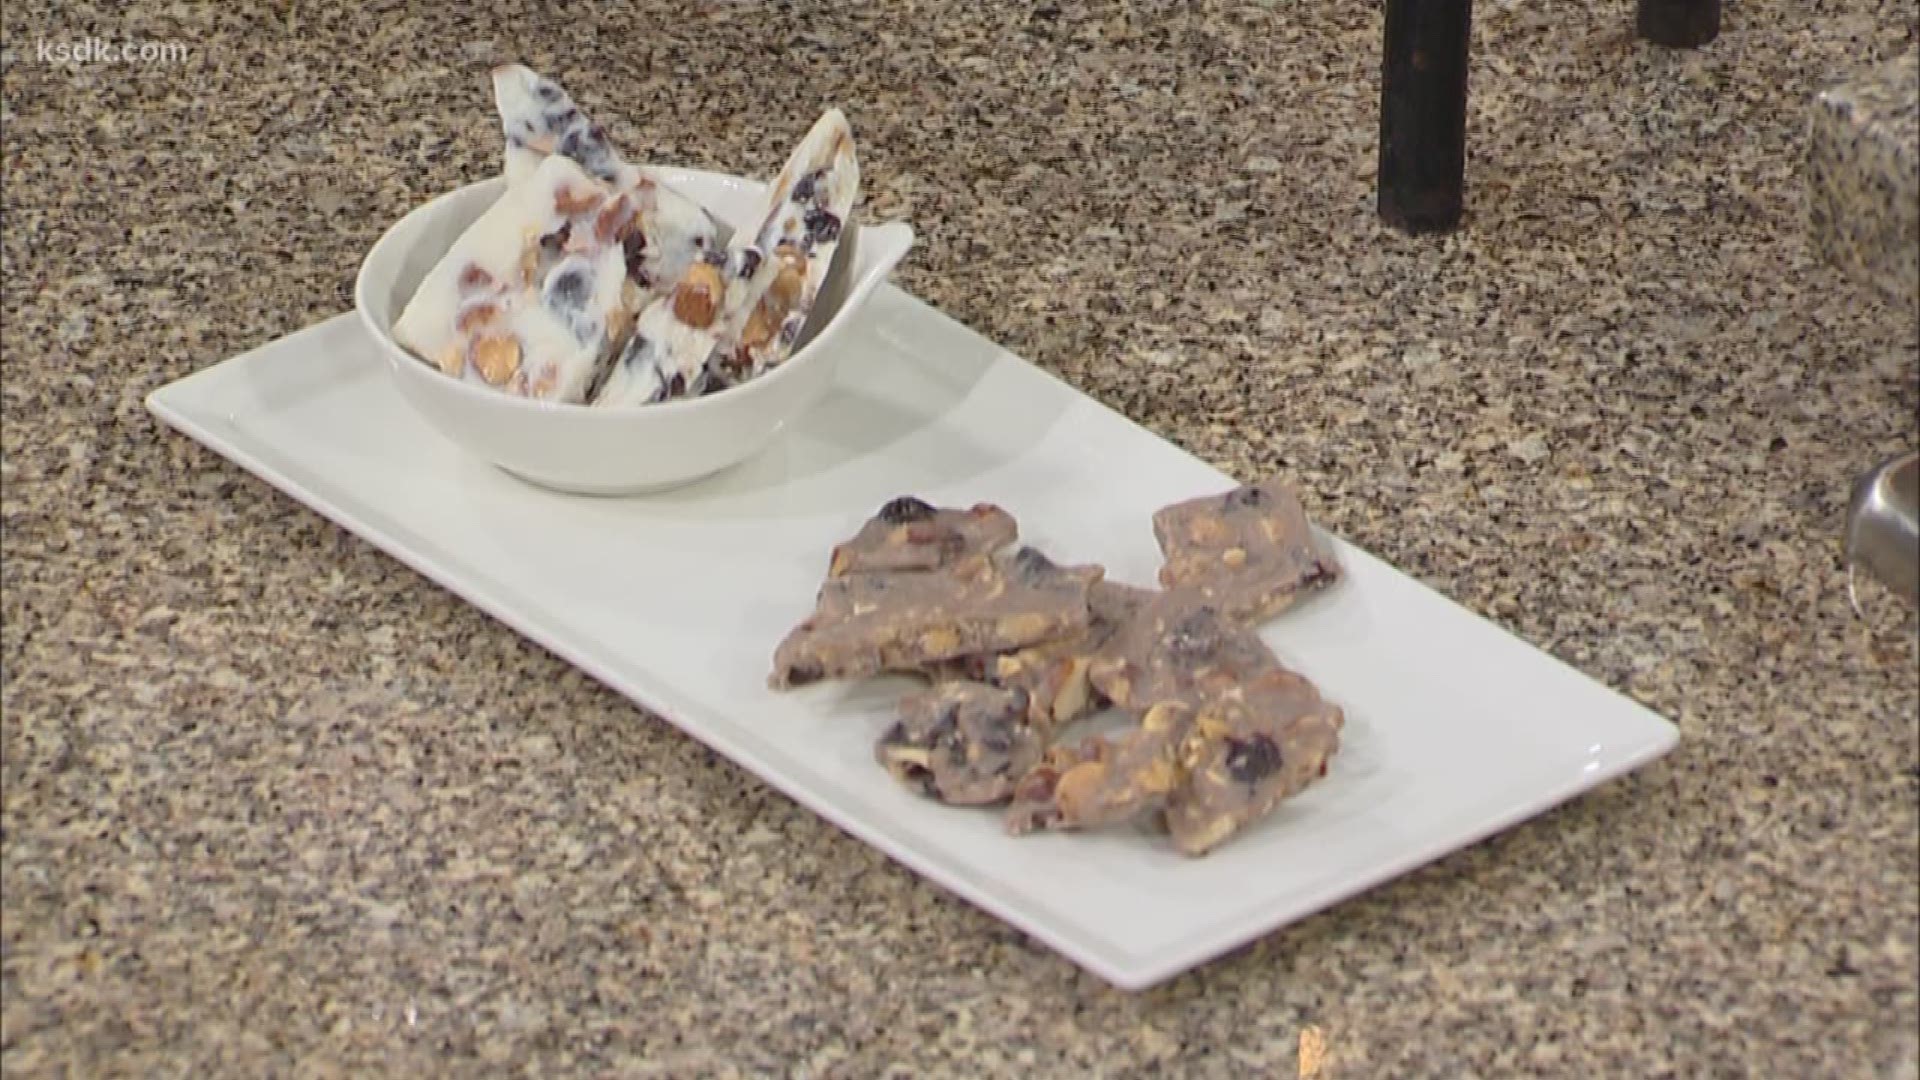 Angie from Cocunut Kitchen shows us how to make Chocolate Almond Cherry Bark and Almond Tart Cherry Bark.